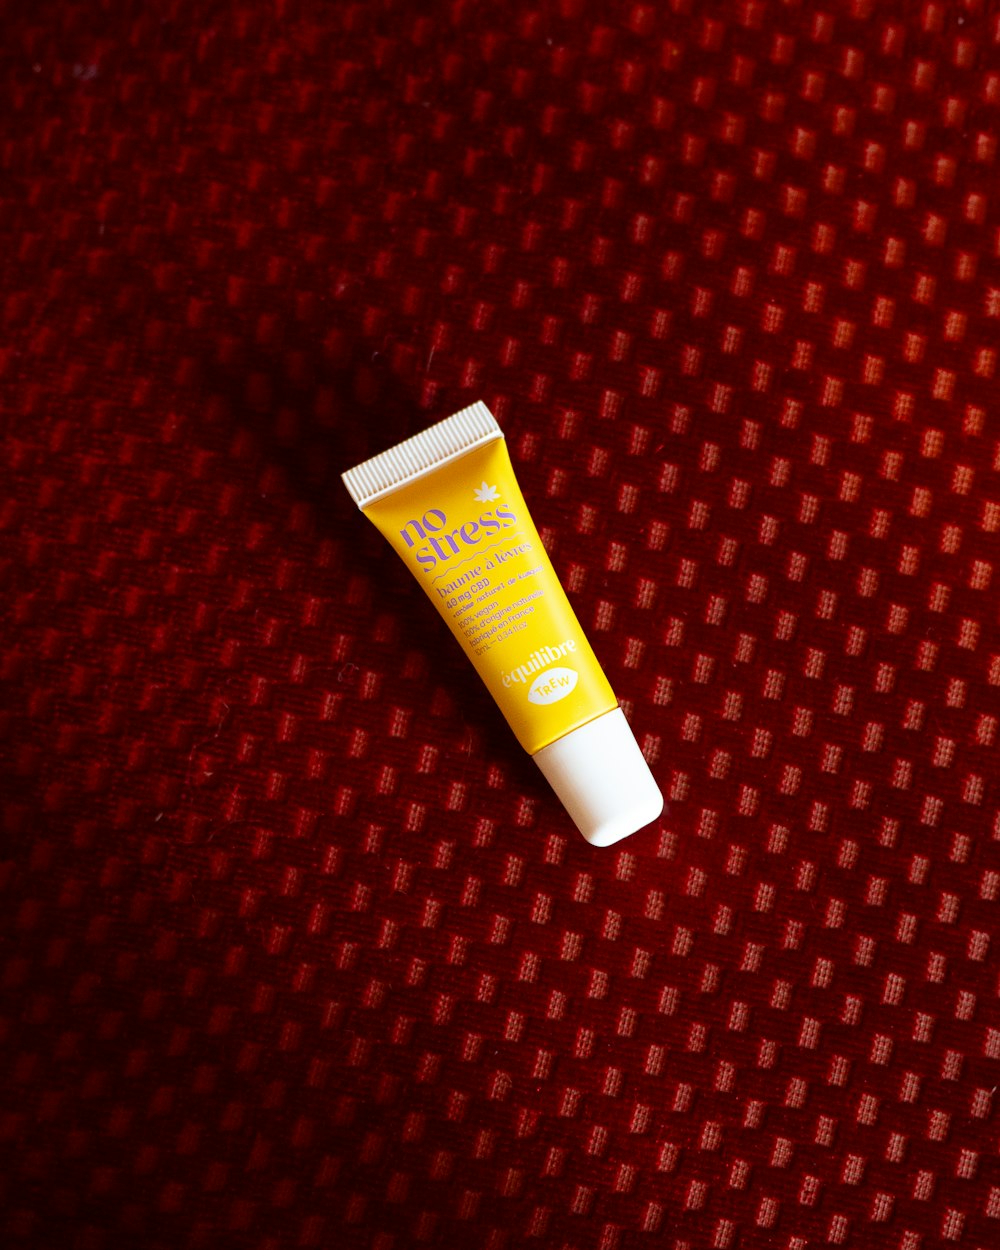 a tube of sunscreen sitting on a red surface